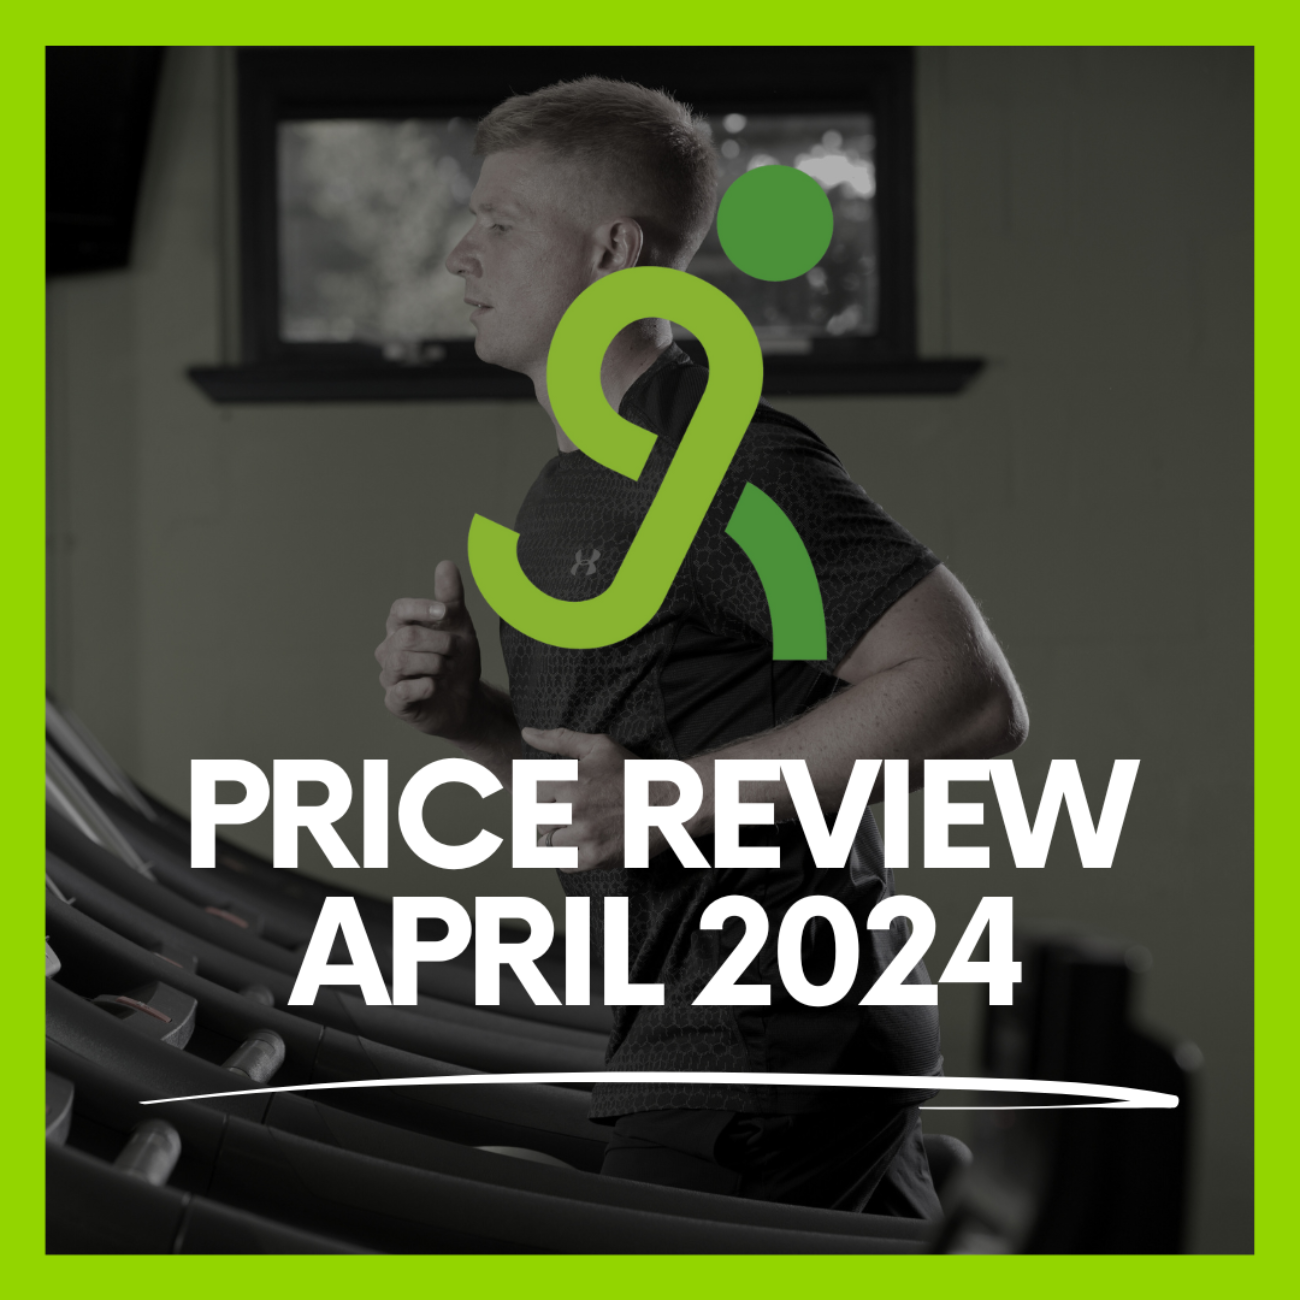 Facility Price Review 1st April 2024